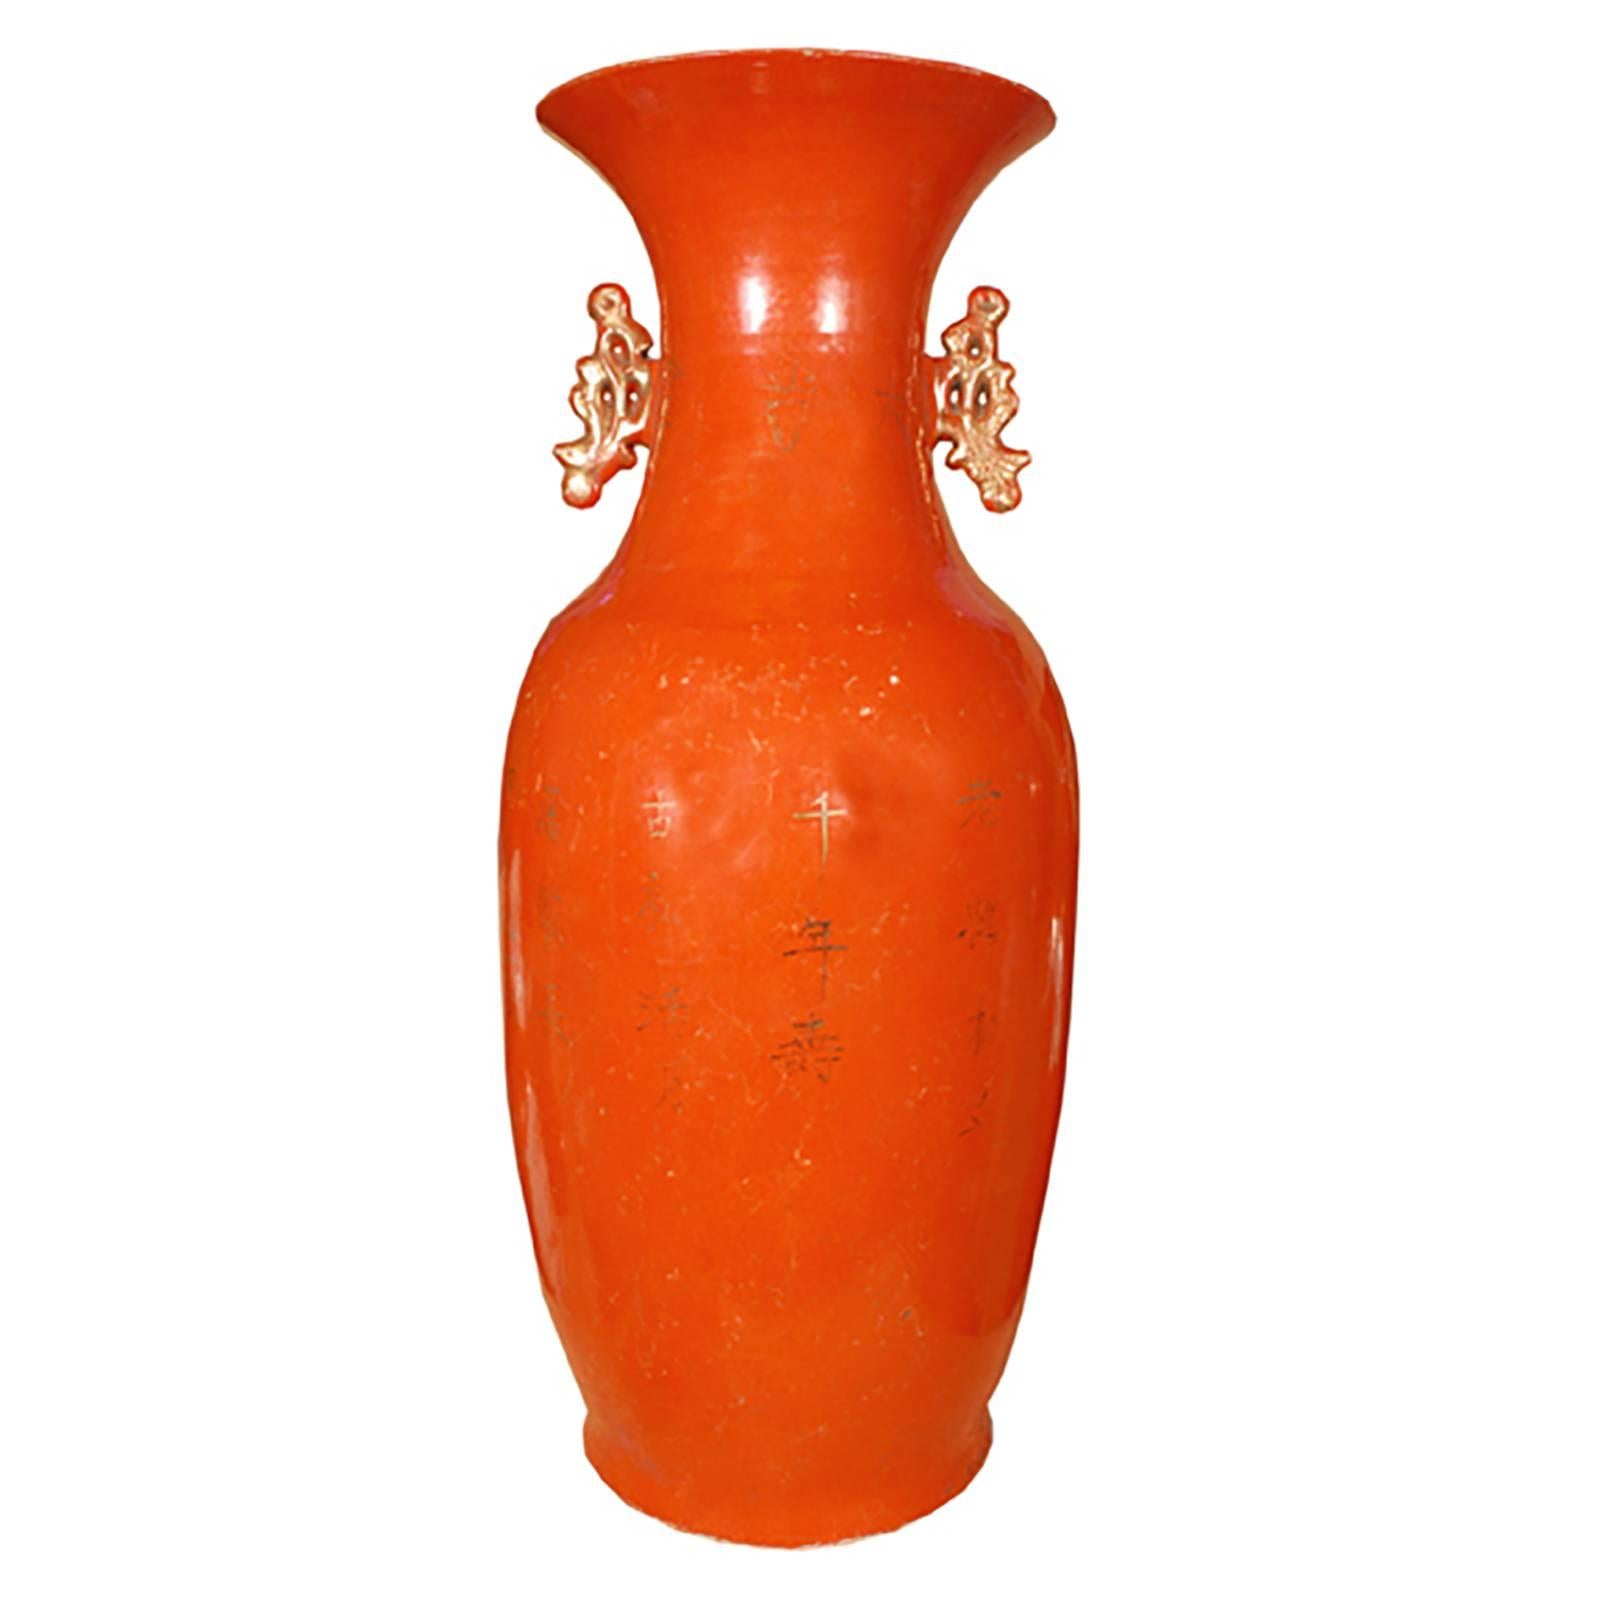 This elegant, phoenix tail form dates to China’s bronze age, but the vase was made in 1920 in China's Zhejiang Province. It has a lovely persimmon and gilt finish and is decorated with auspicious cranes. When this unique jar was made the world was